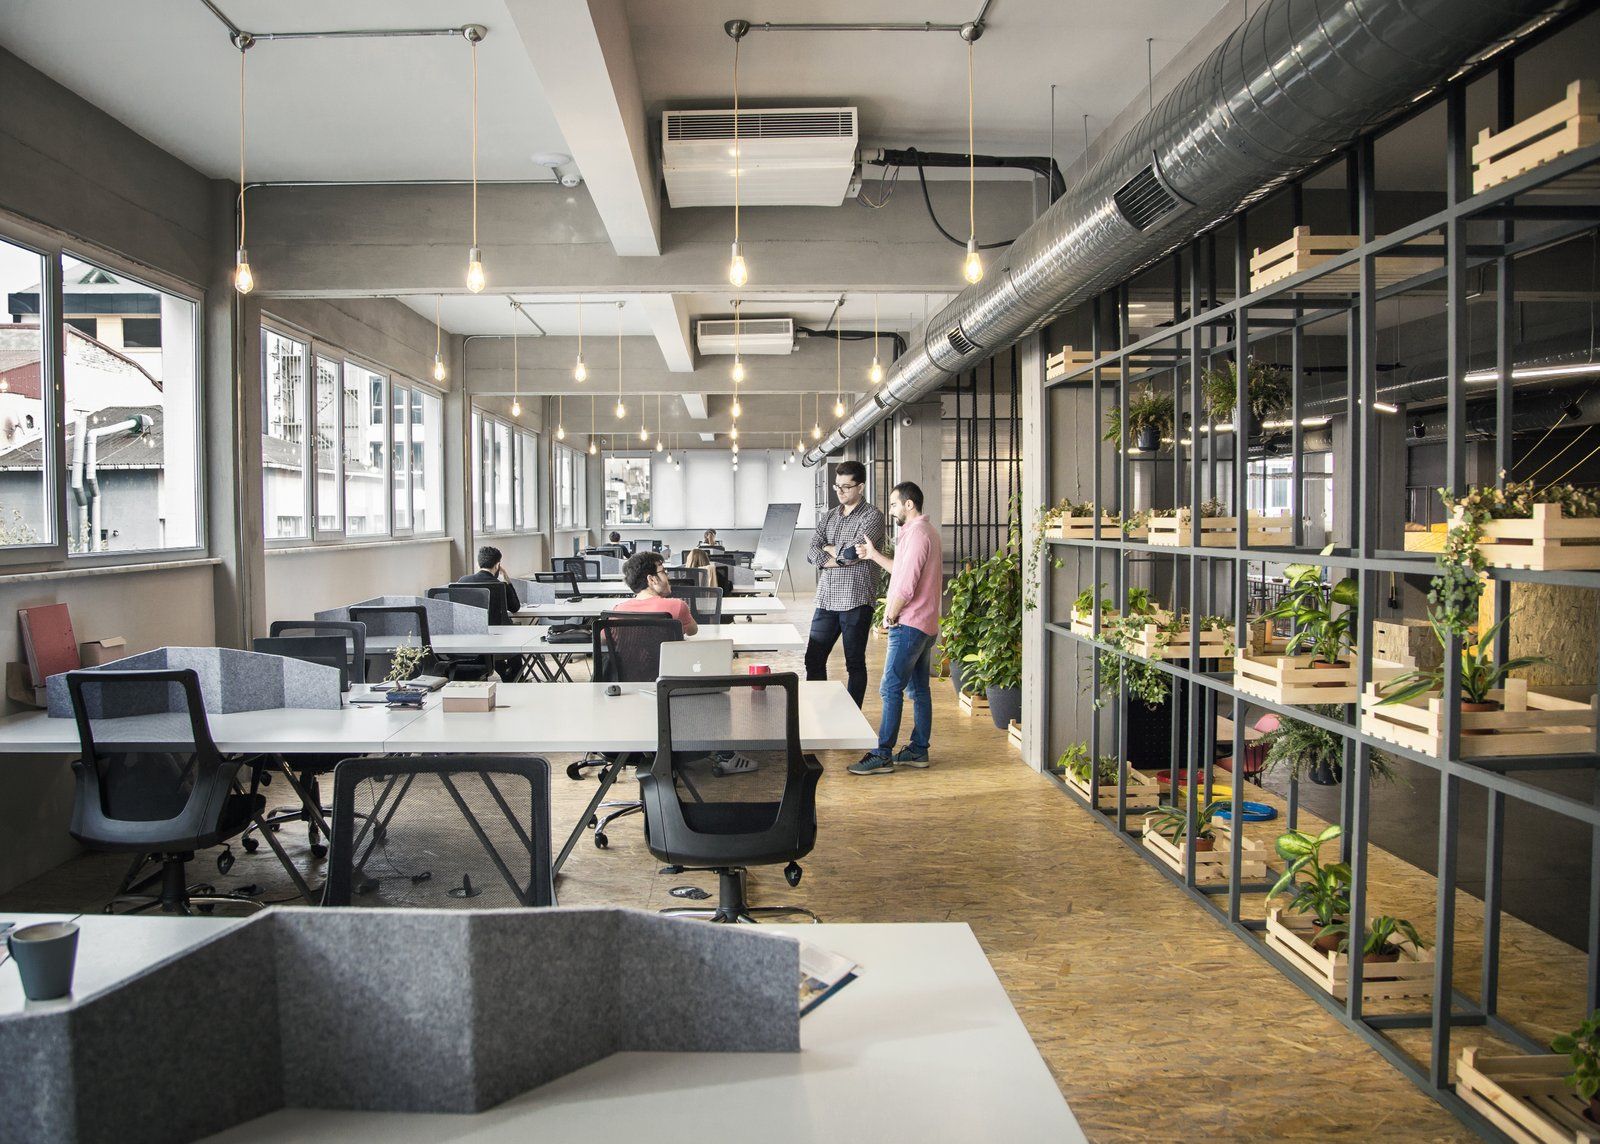 Industrial Style in Offices